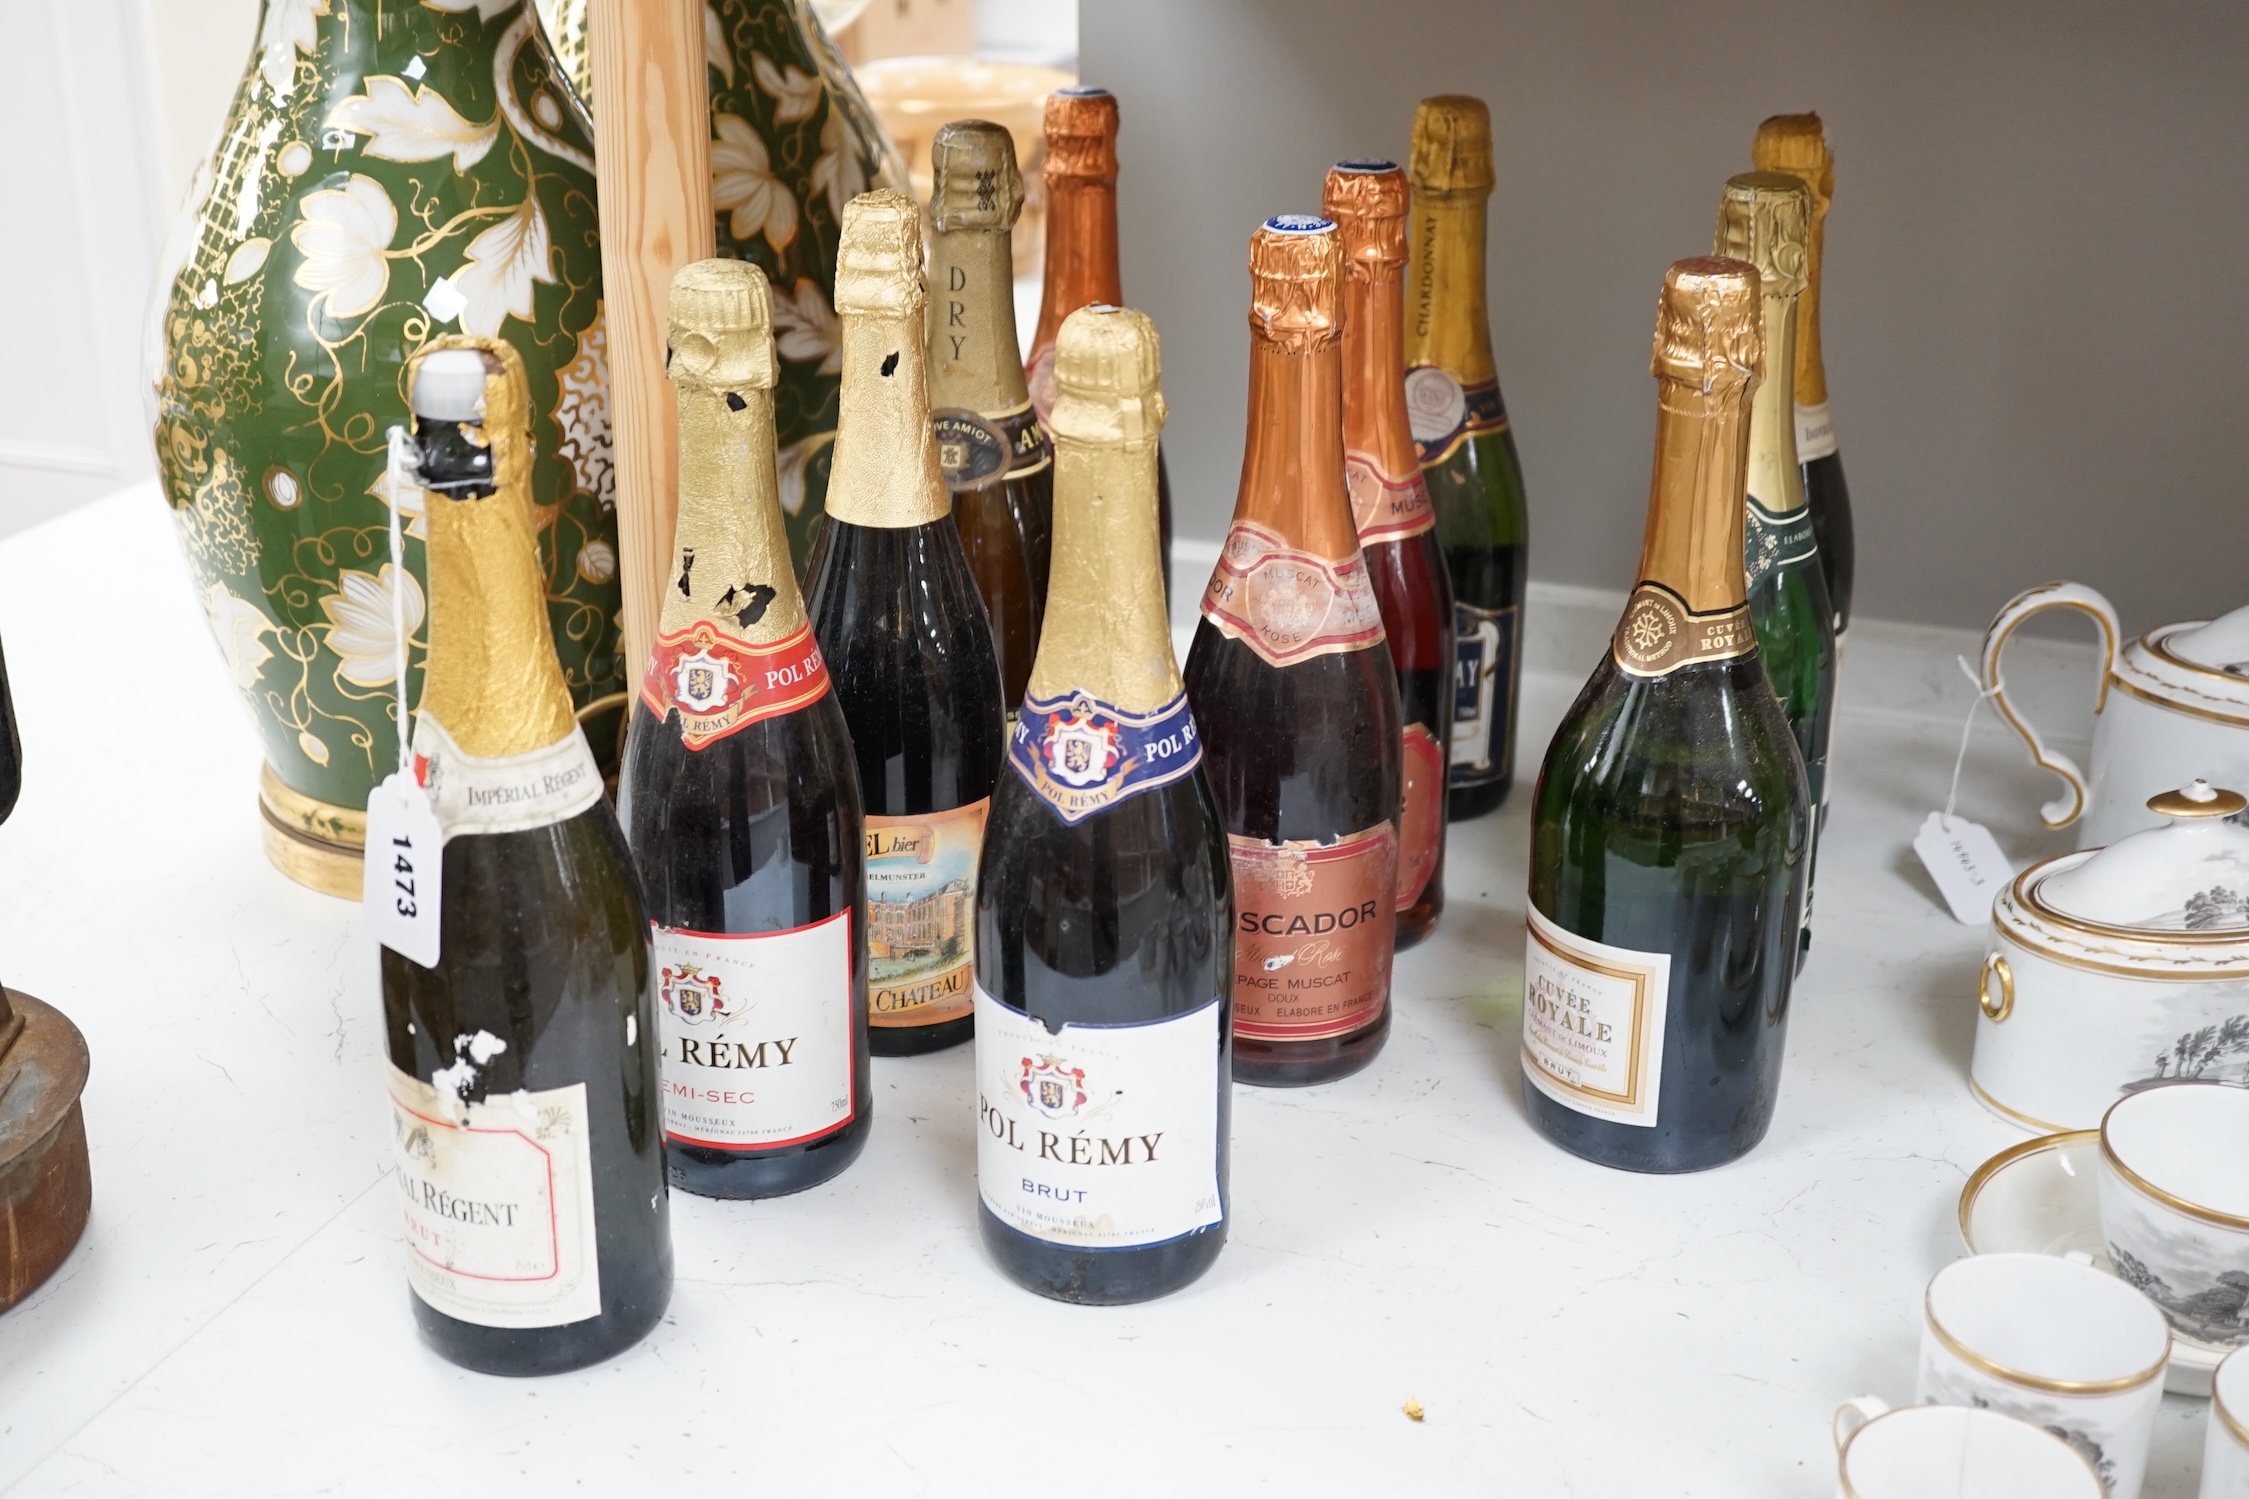 Fifteen bottles of sparkling wine to include Muscador, Lindauer, and Pol Remy. Condition - fair, storage history unknown